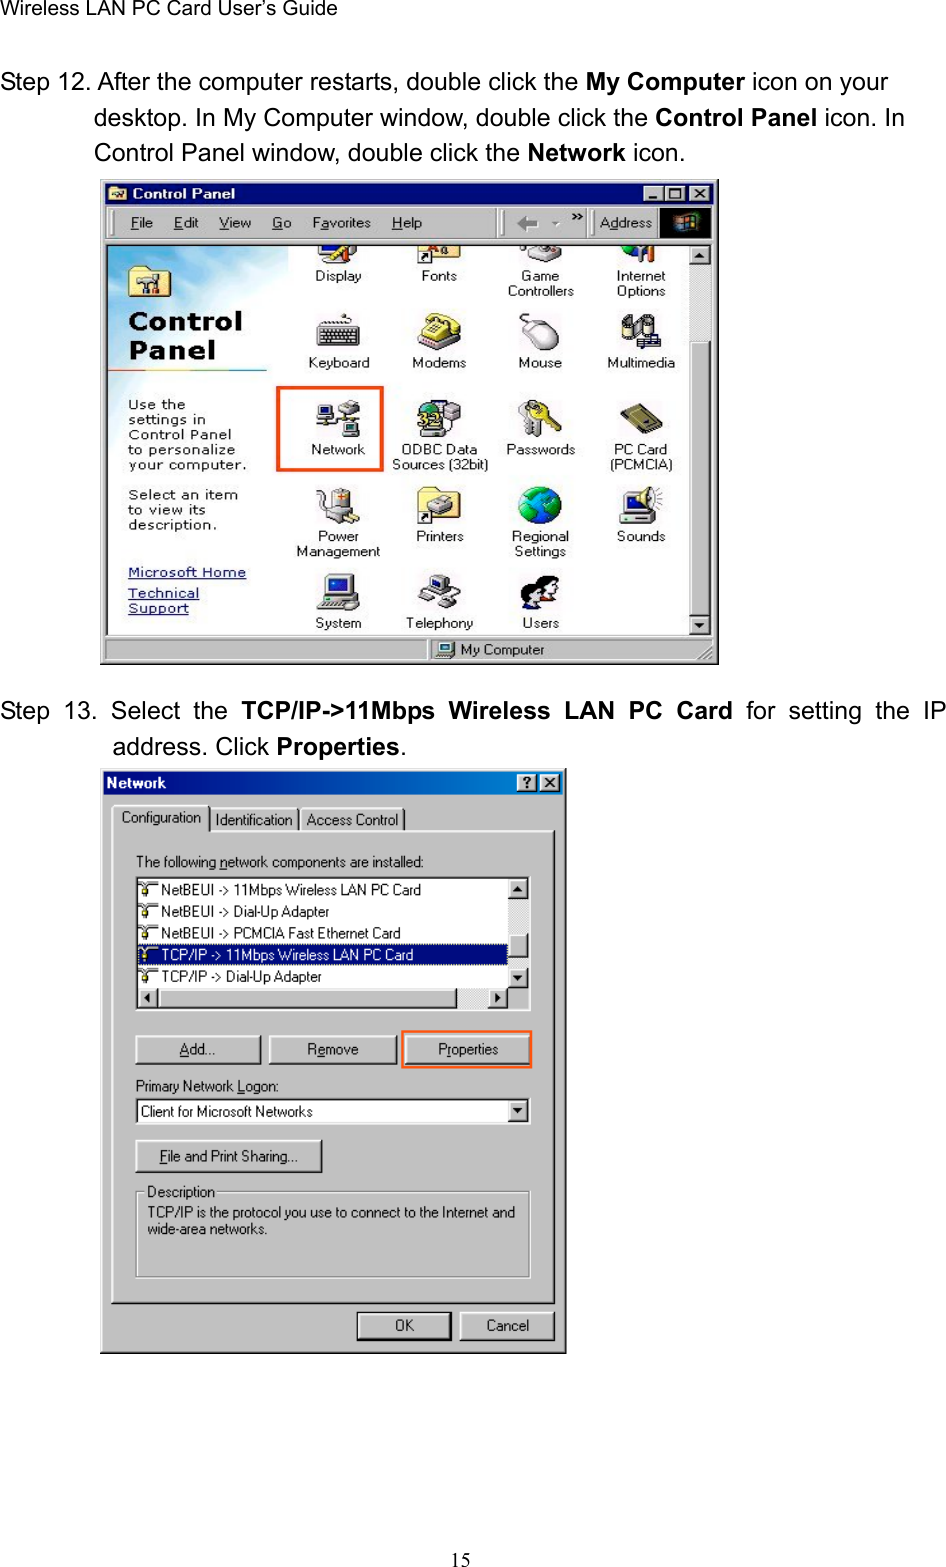 Wireless LAN PC Card User’s Guide15Step 12. After the computer restarts, double click the My Computer icon on yourdesktop. In My Computer window, double click the Control Panel icon. InControl Panel window, double click the Network icon.Step 13. Select the TCP/IP-&gt;11Mbps Wireless LAN PC Card for setting the IPaddress. Click Properties.  